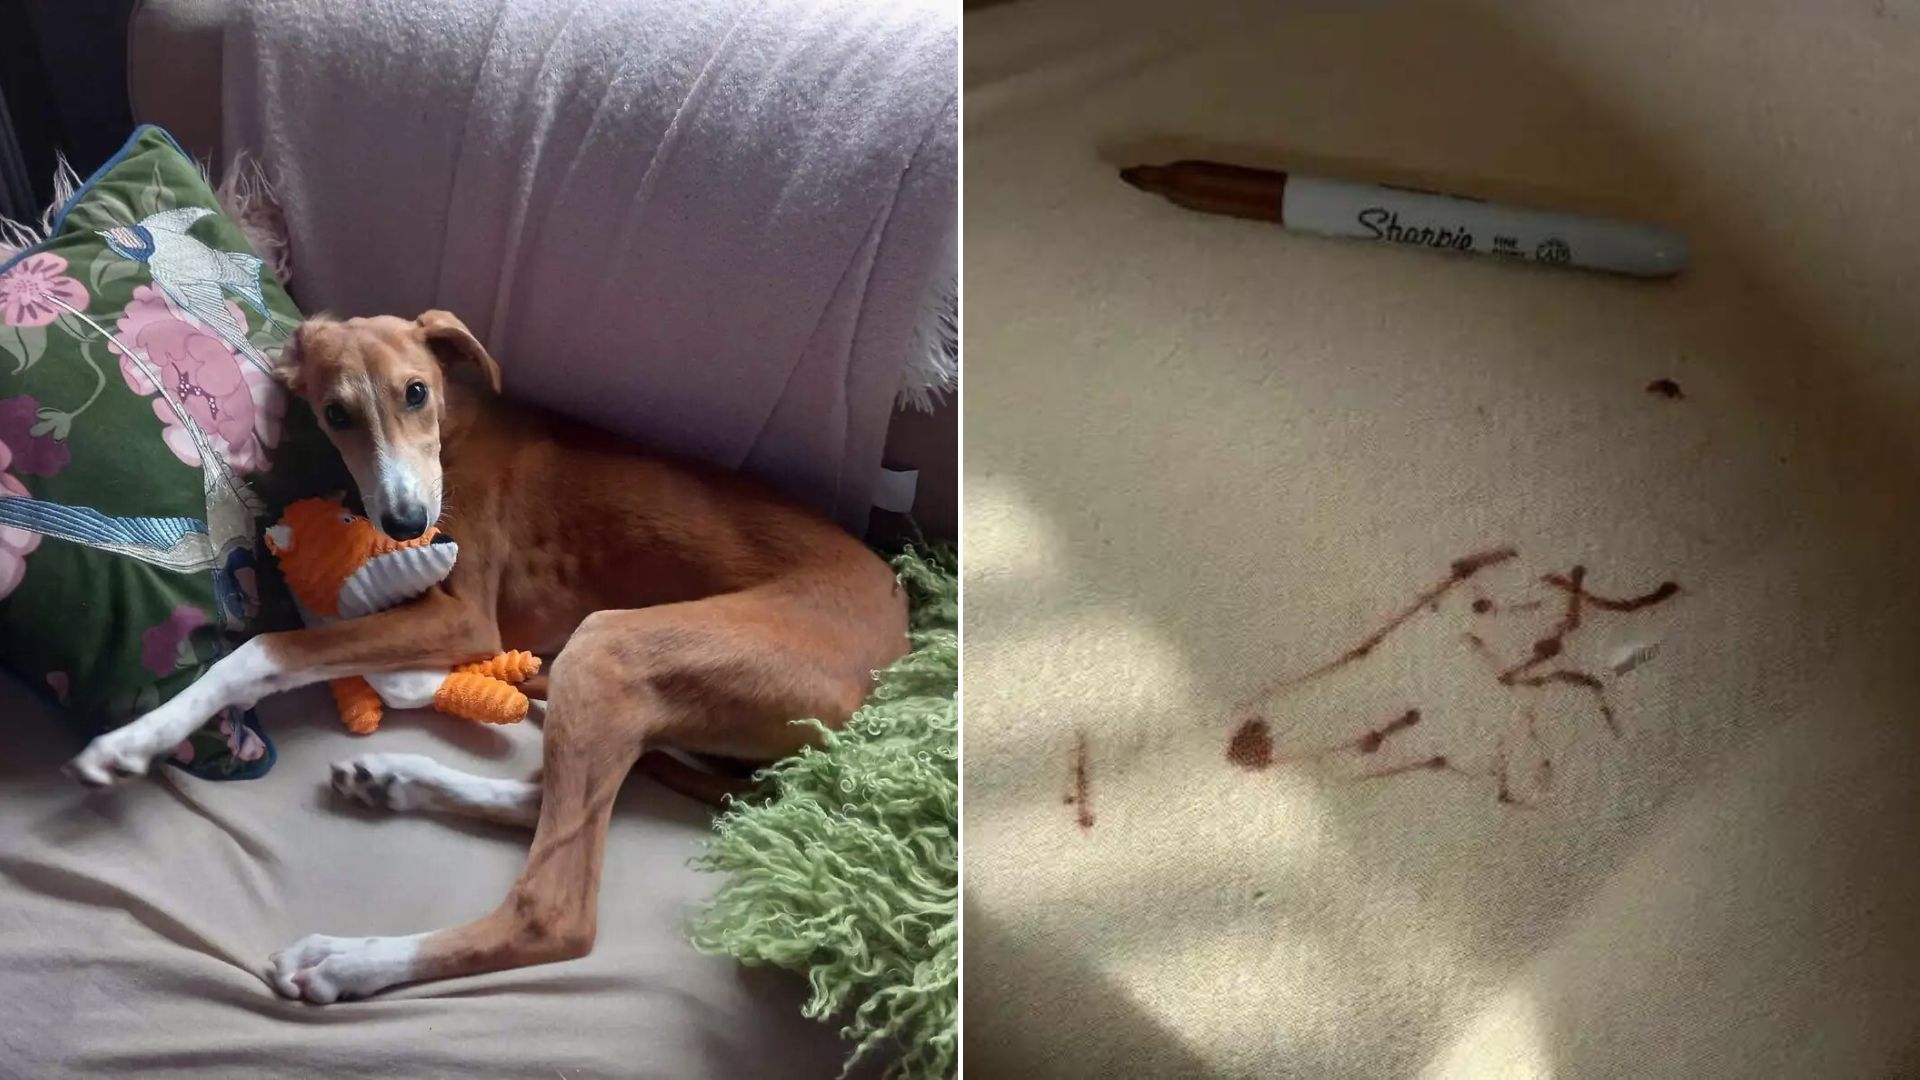 Mischievous Dog Played With His Mom’s Permanent Marker And Drew His Very Own Self-Portrait